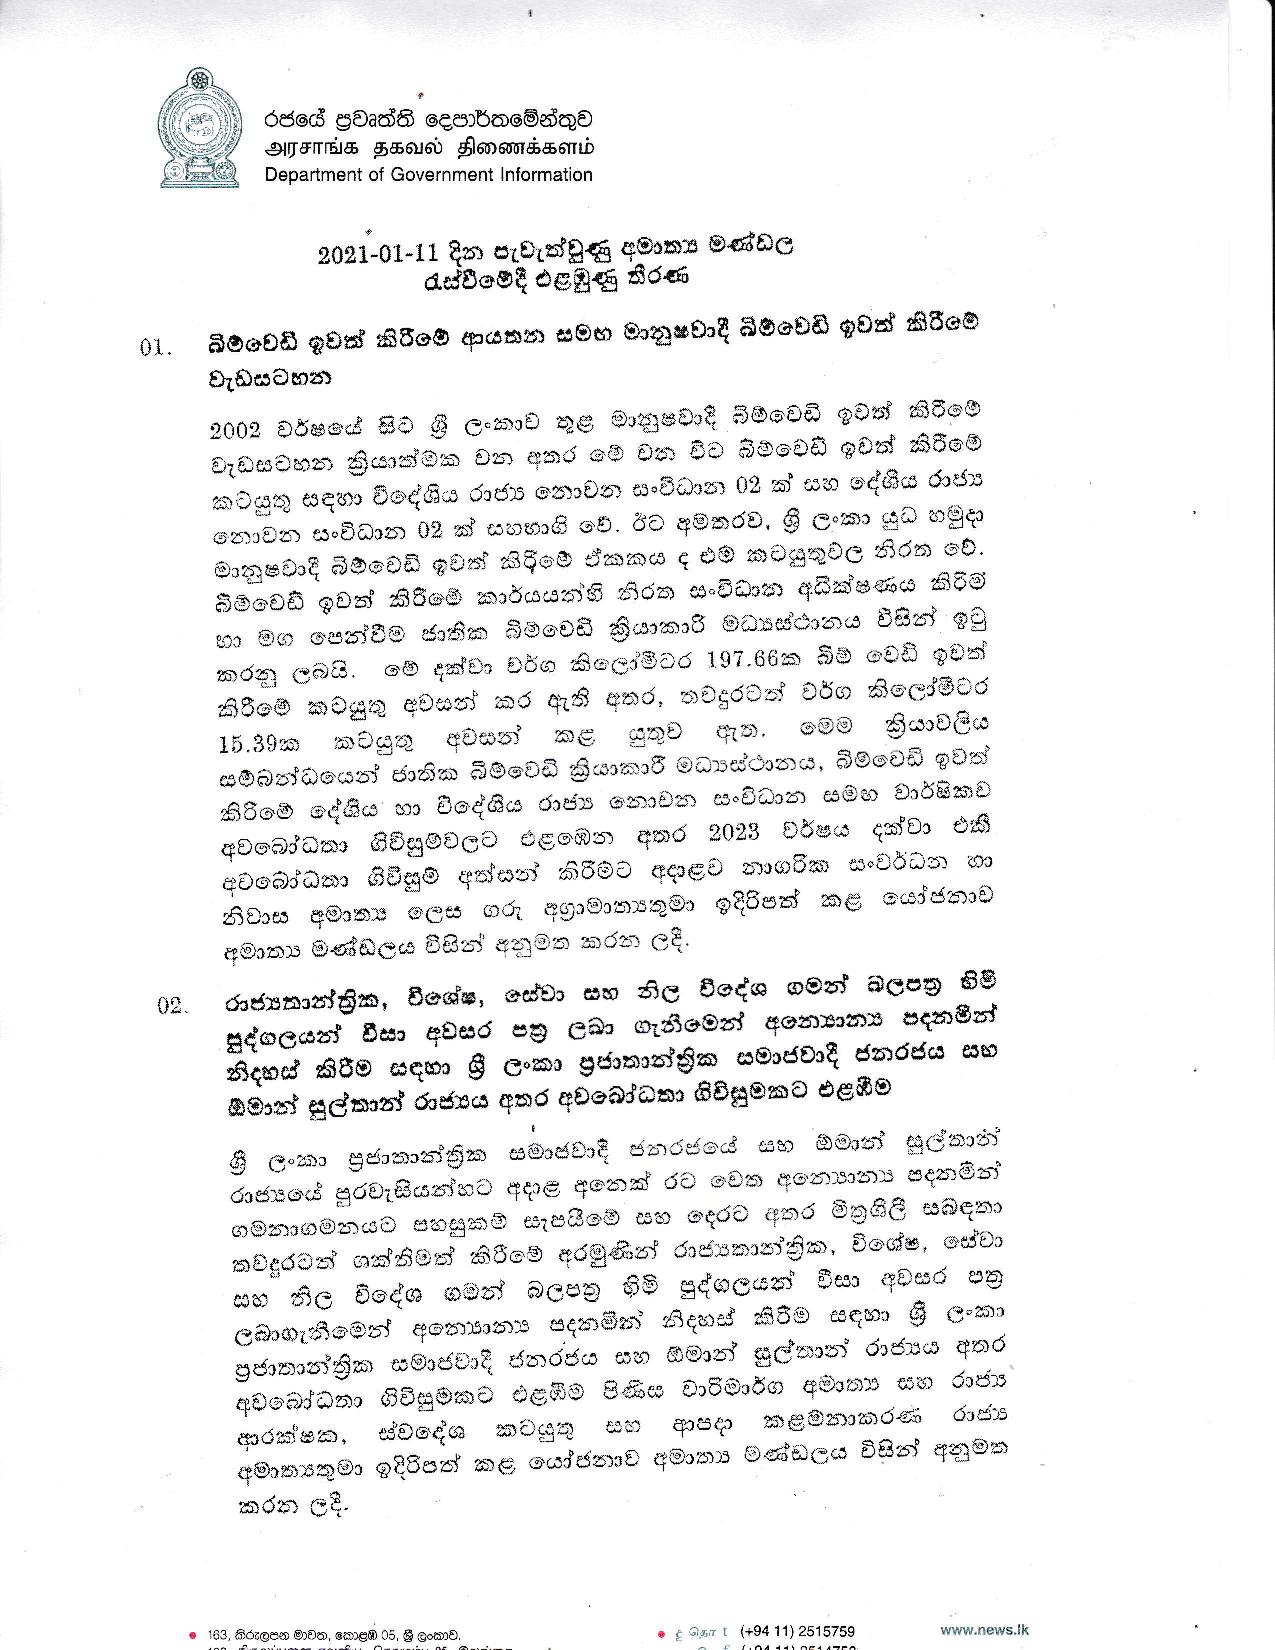 Cabinet Decision on 11.01.2021 page 001